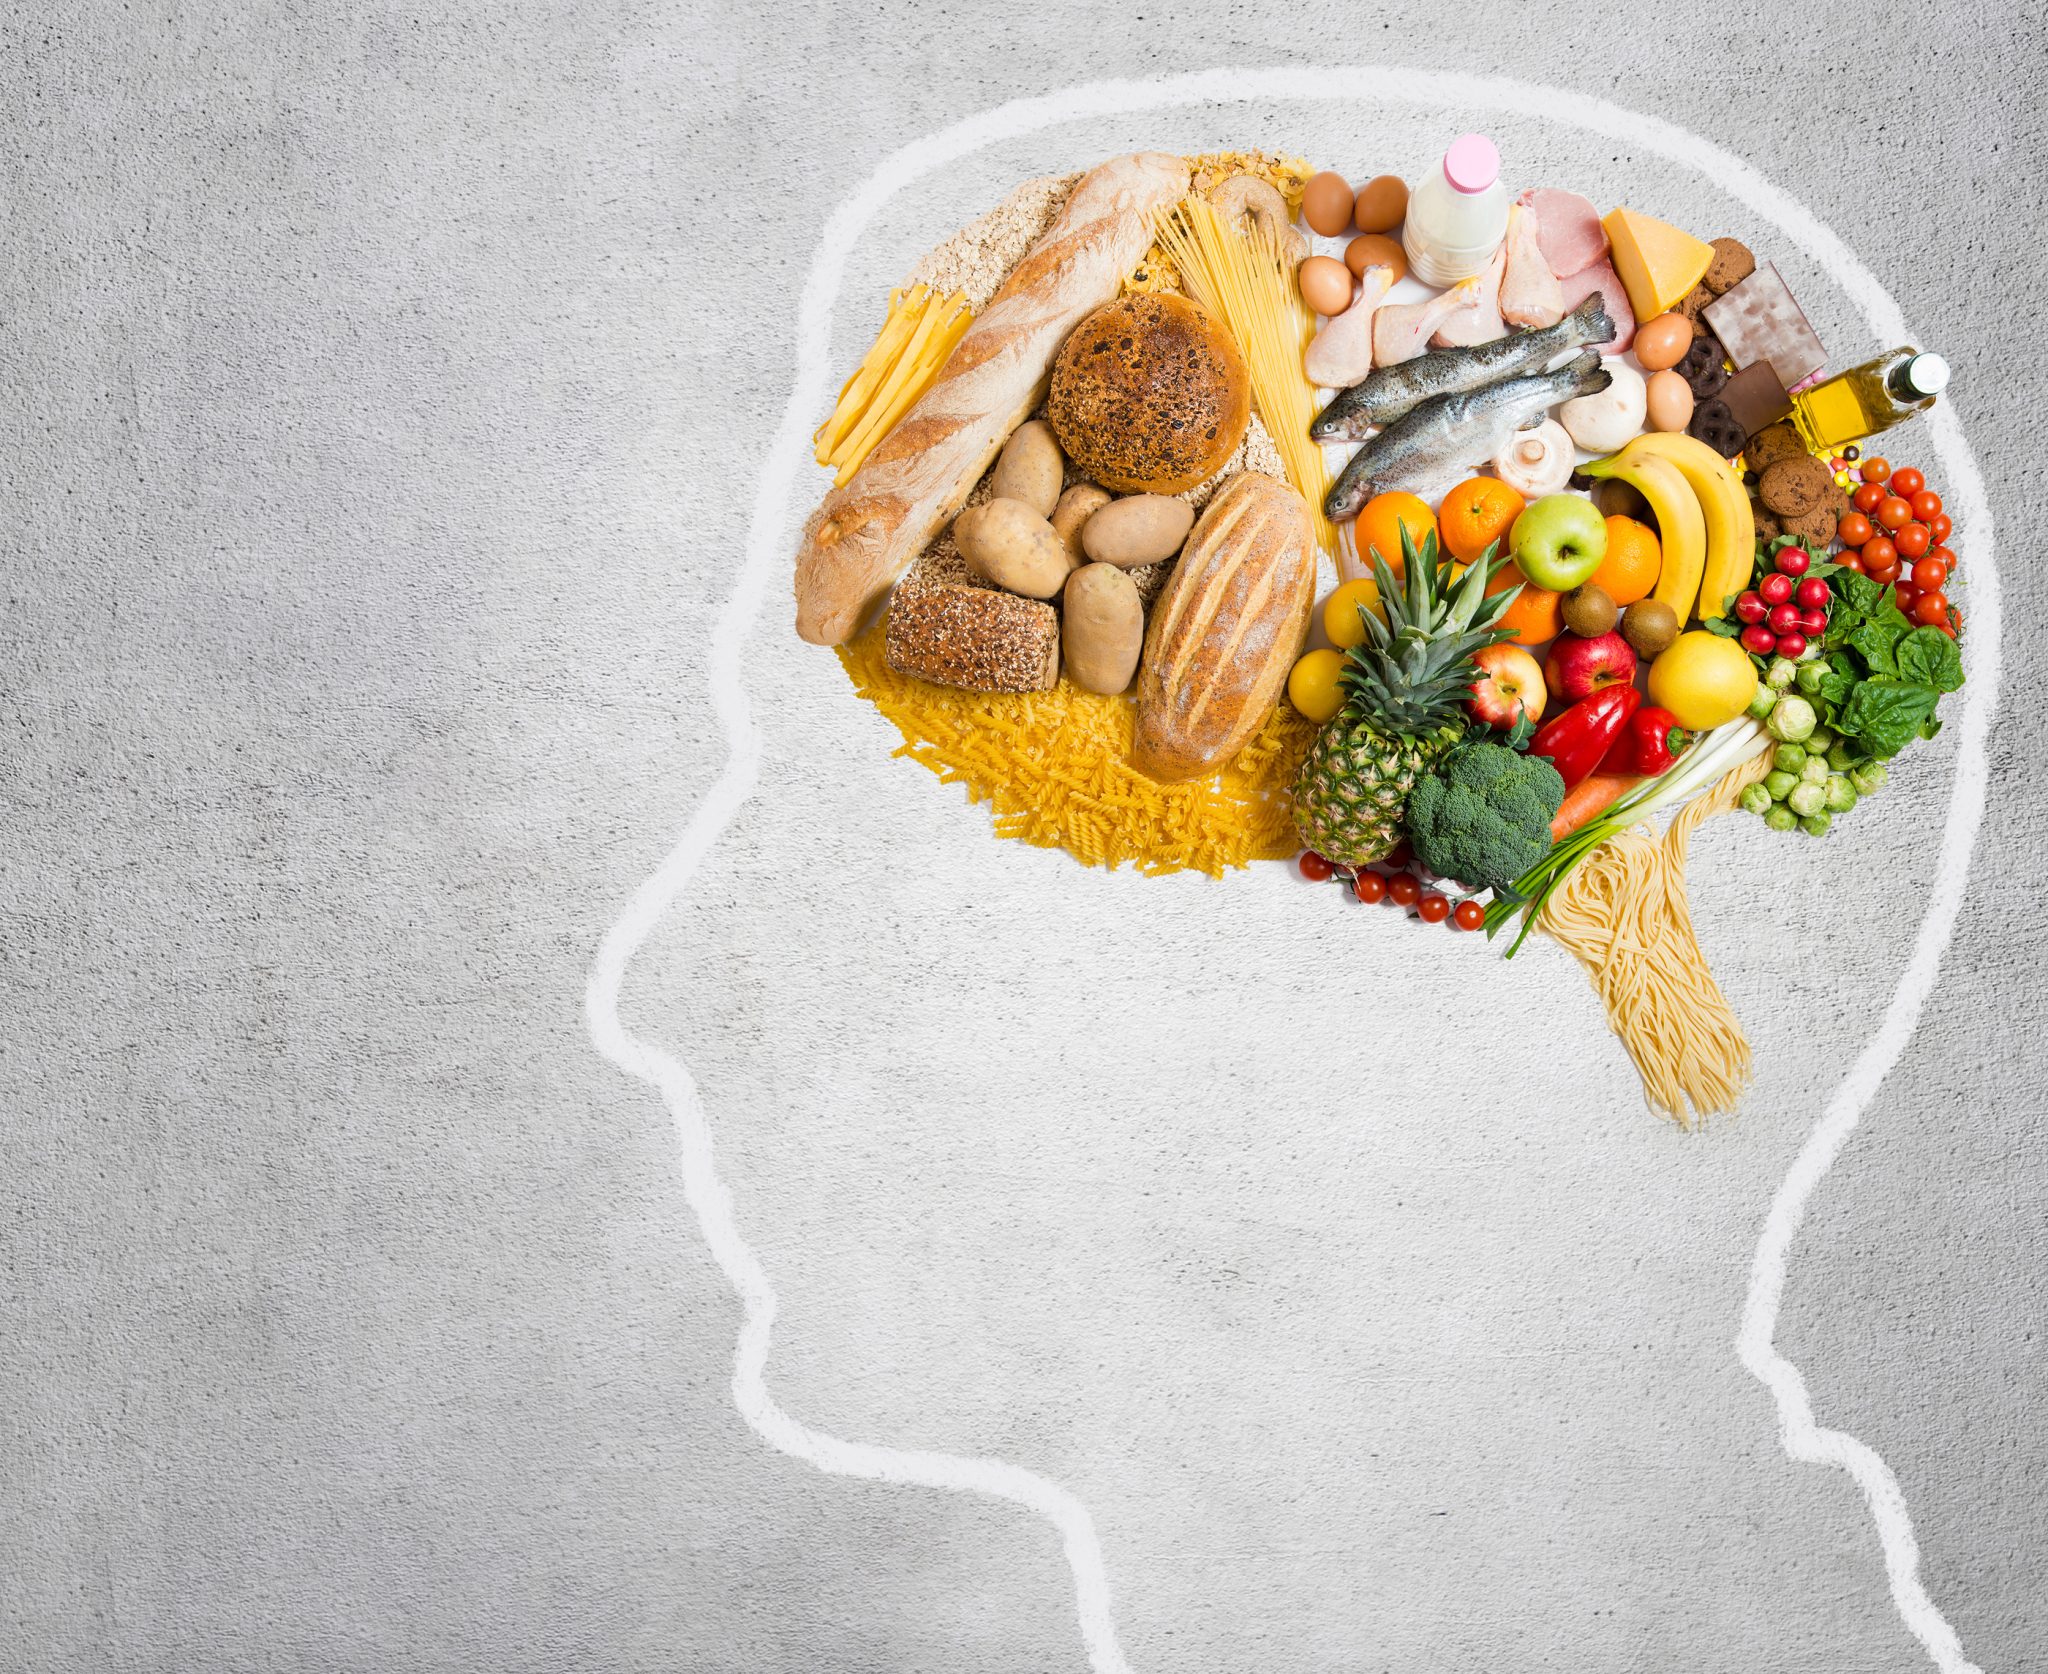 Eating Too Much? You Can Blame Your Brain: